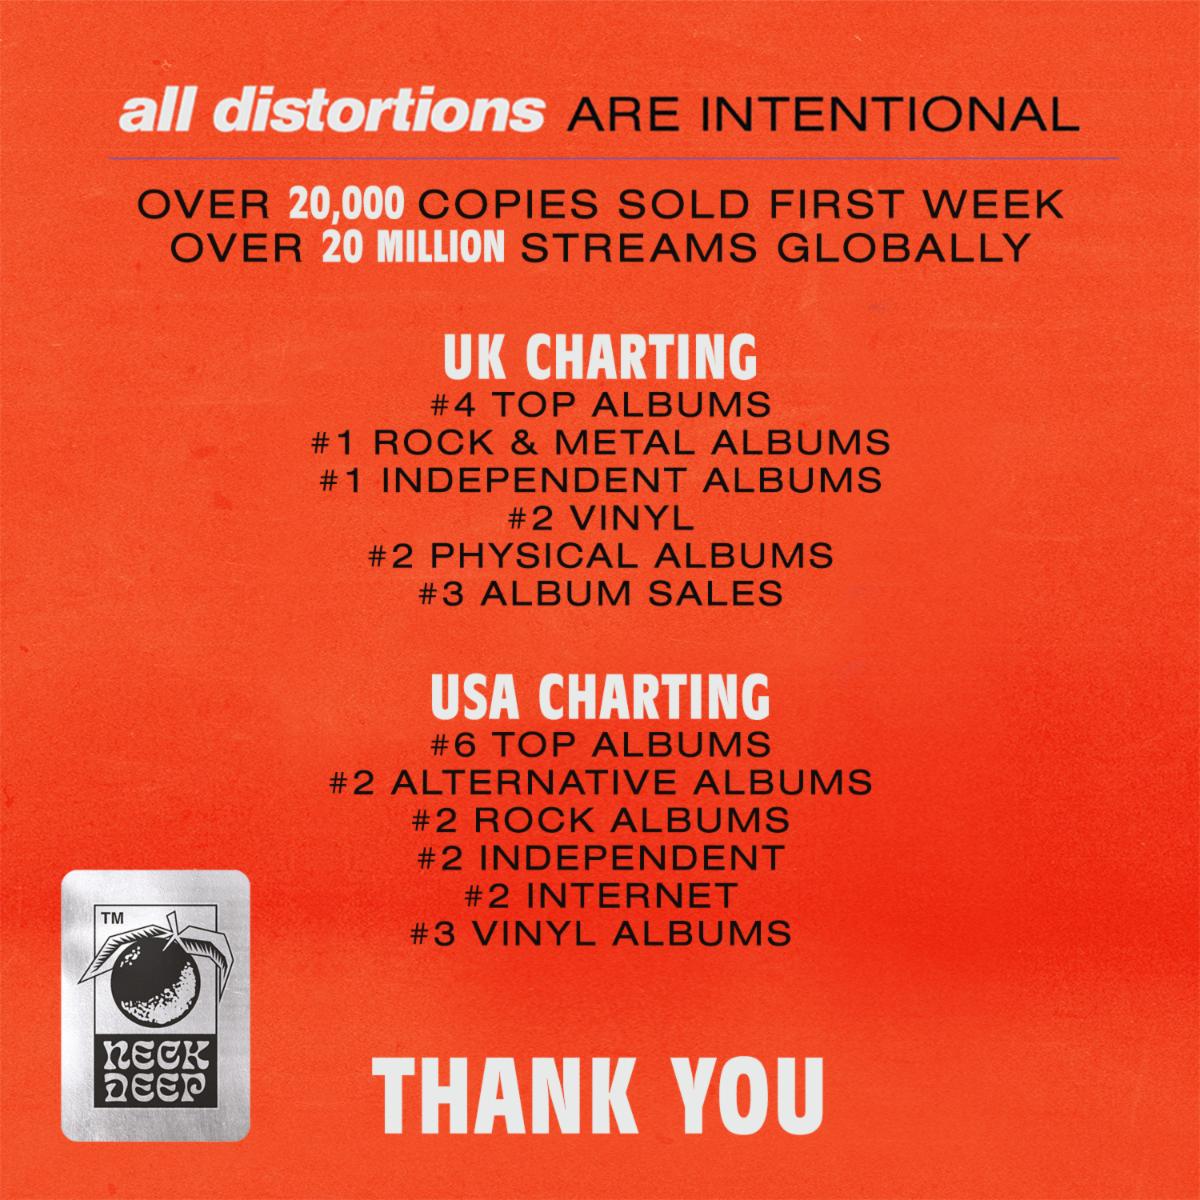 Neck Deep Celebrates Over 20K Copies Sold + 20M Streams Globally First Week - All Distortions Are Intentional